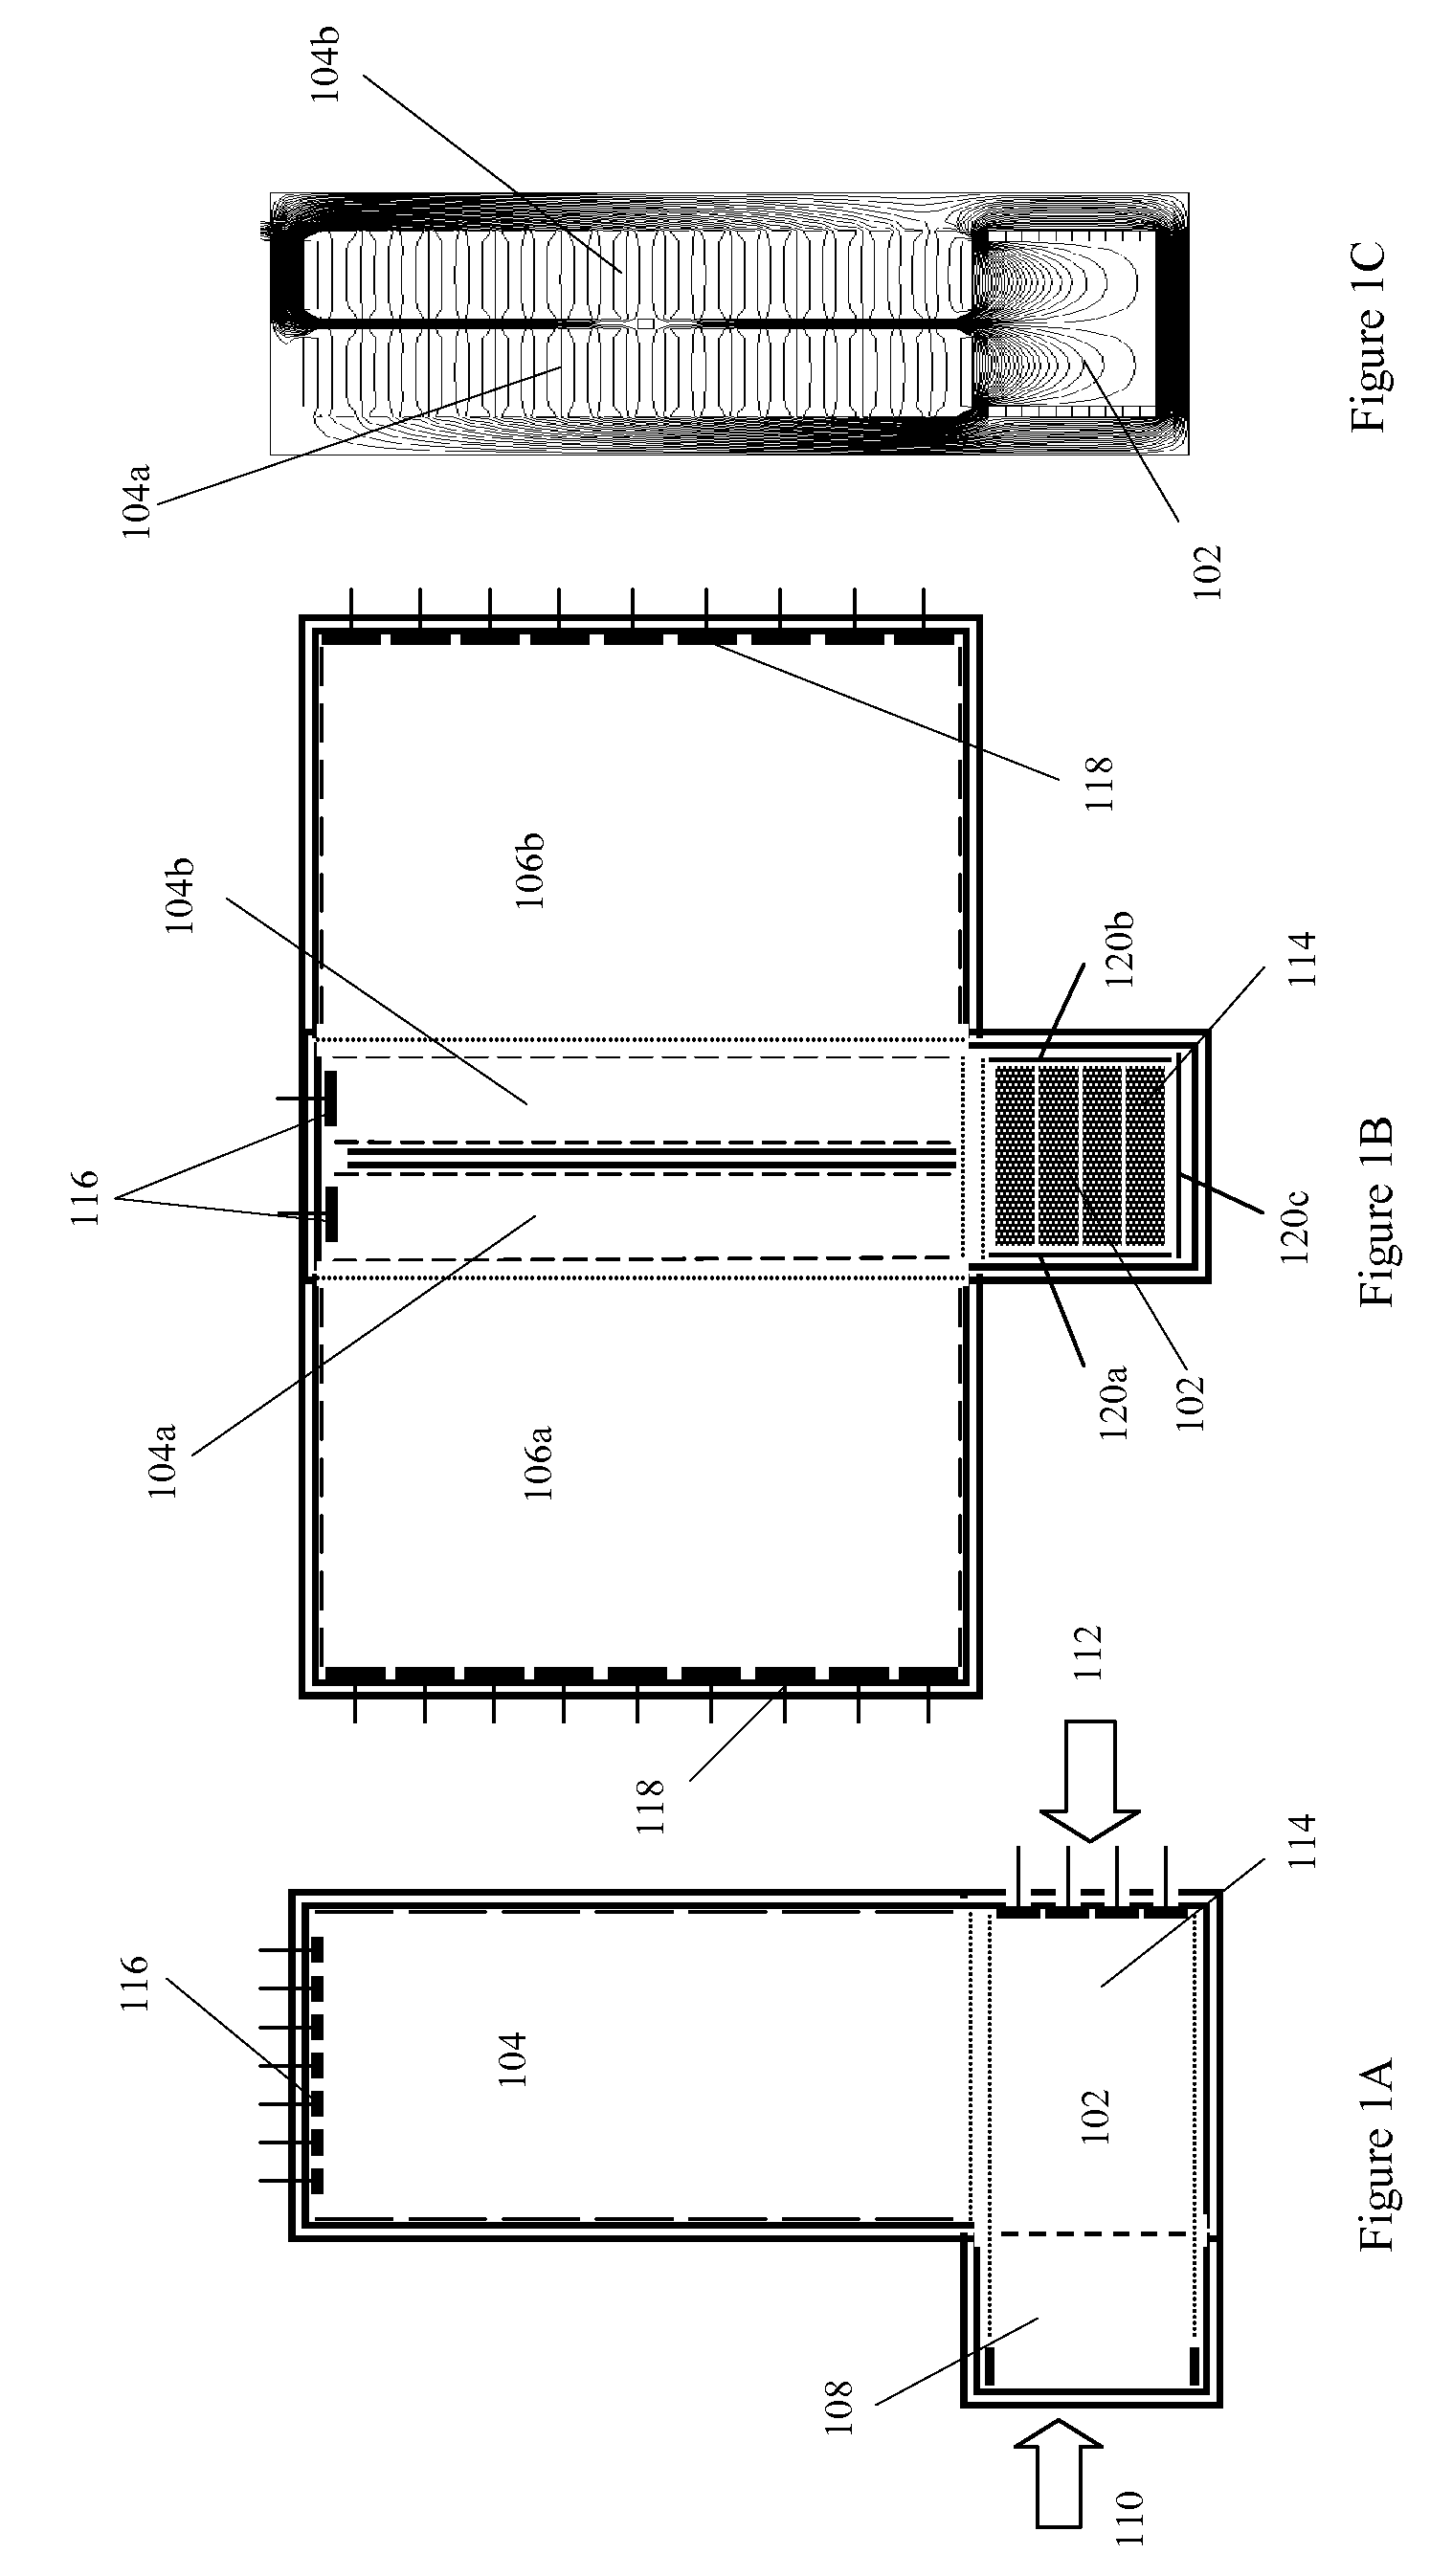 Multidimensional ion mobility spectrometry apparatus and methods